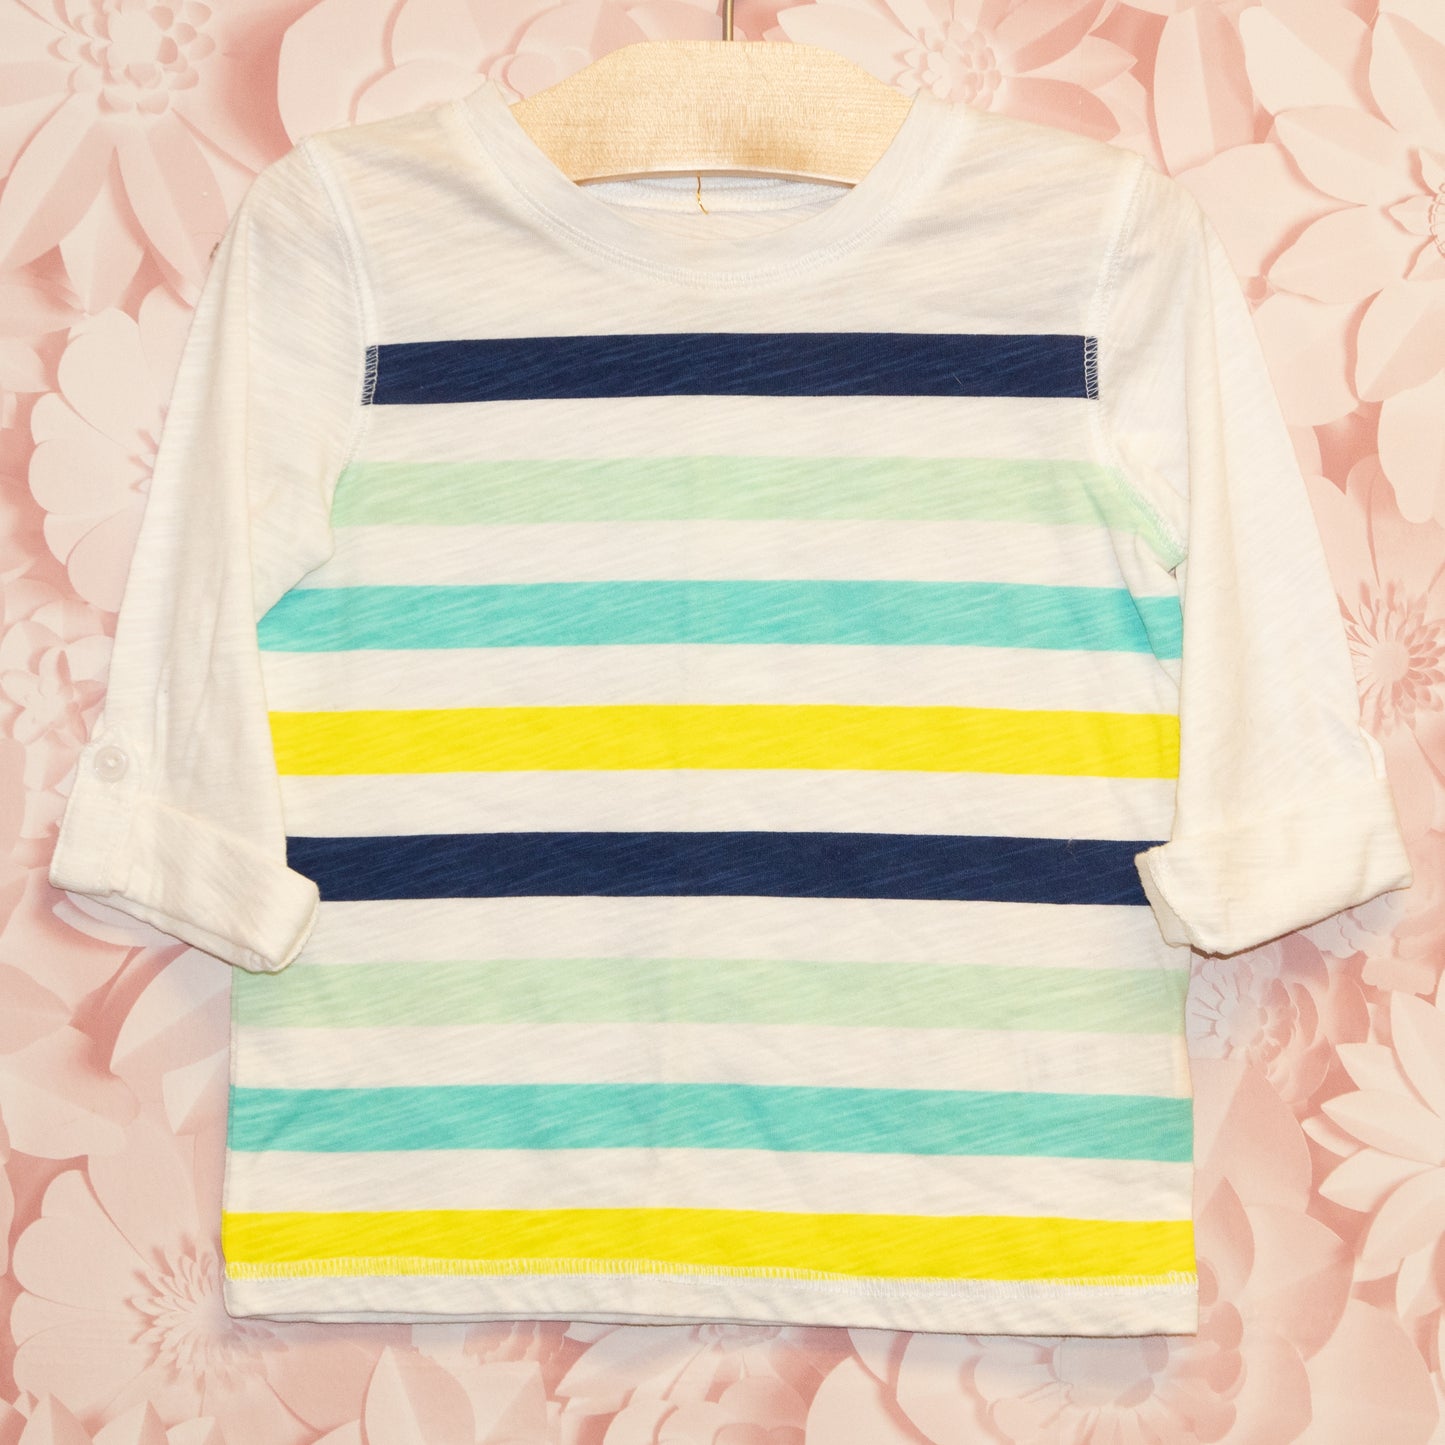 Striped Tee Size 3T